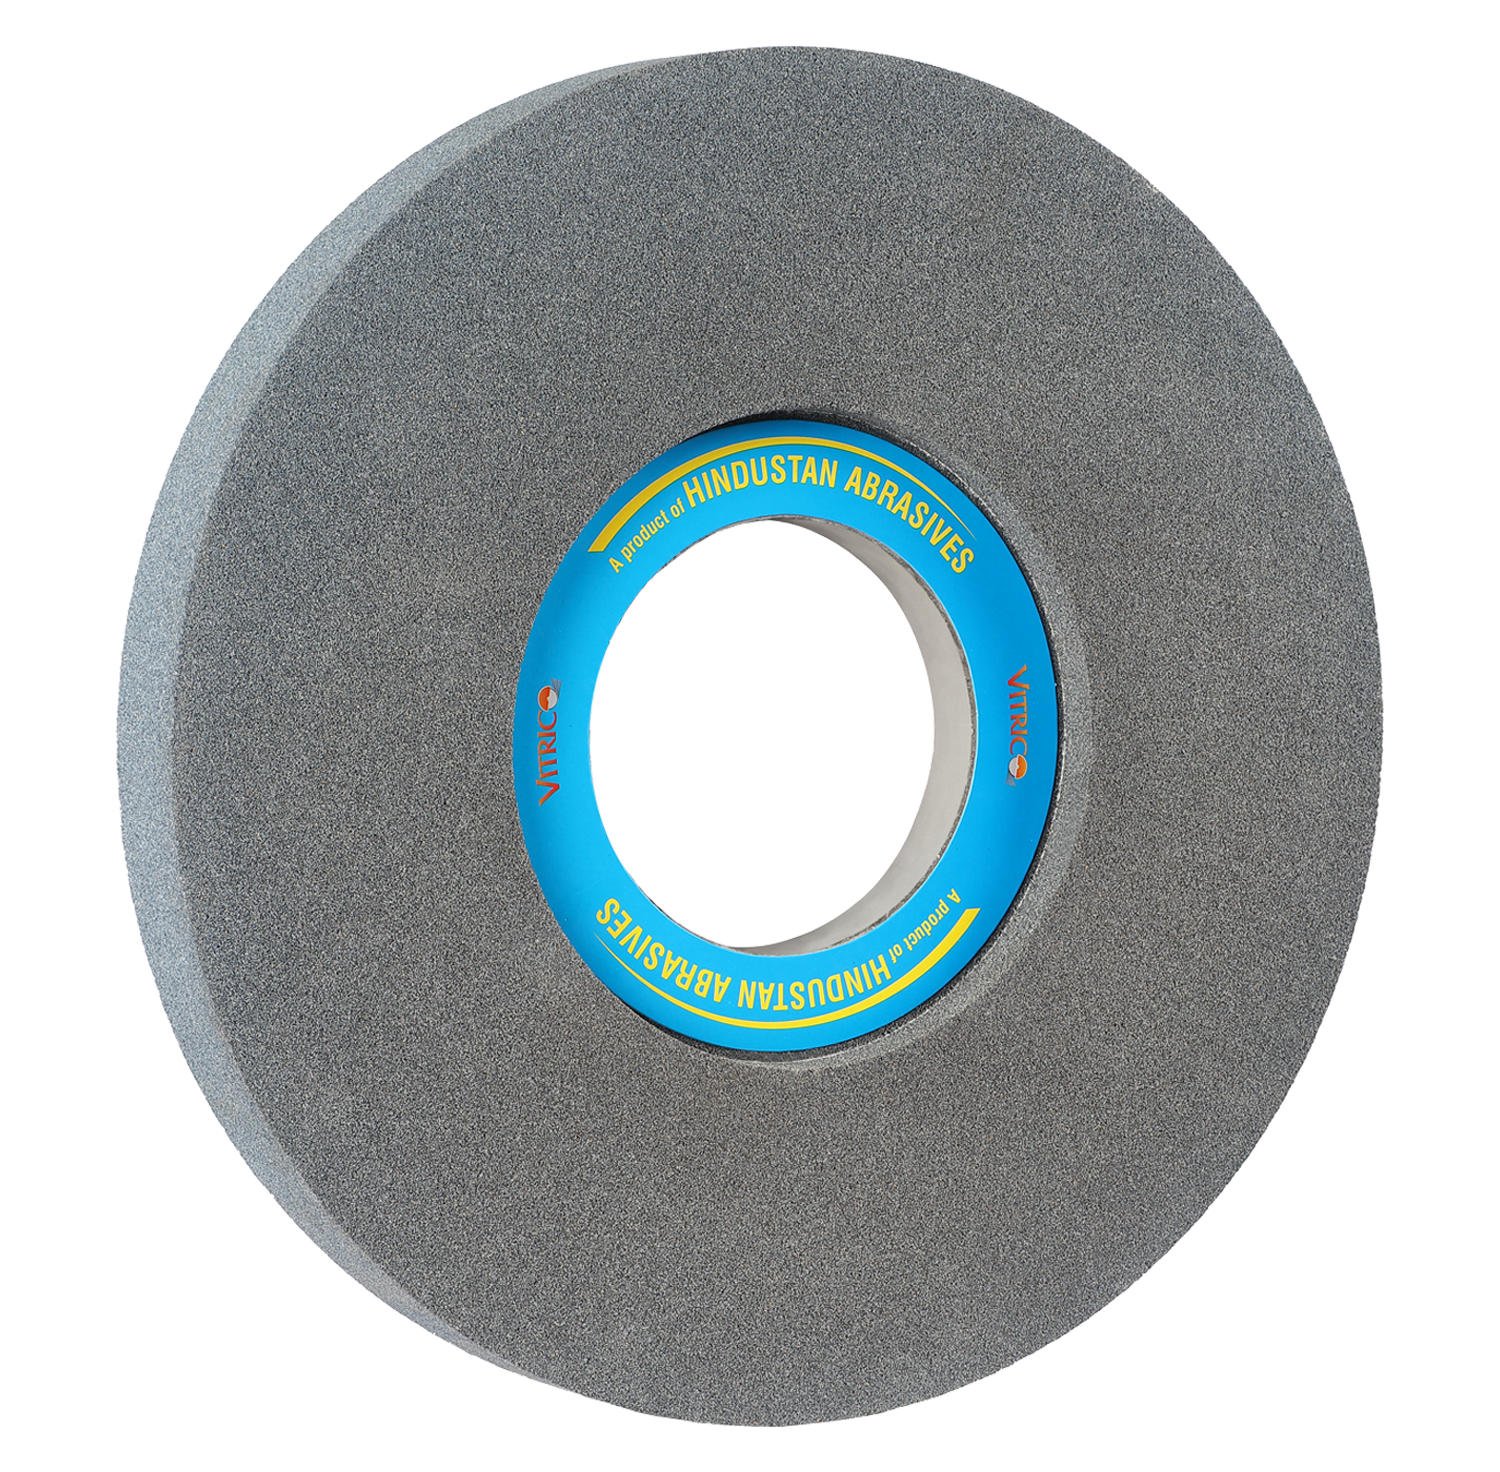 https://www.hindustanabrasives.com/wp-content/themes/hindustanabrasives/images/product/cylindrical-grinding-wheel.png